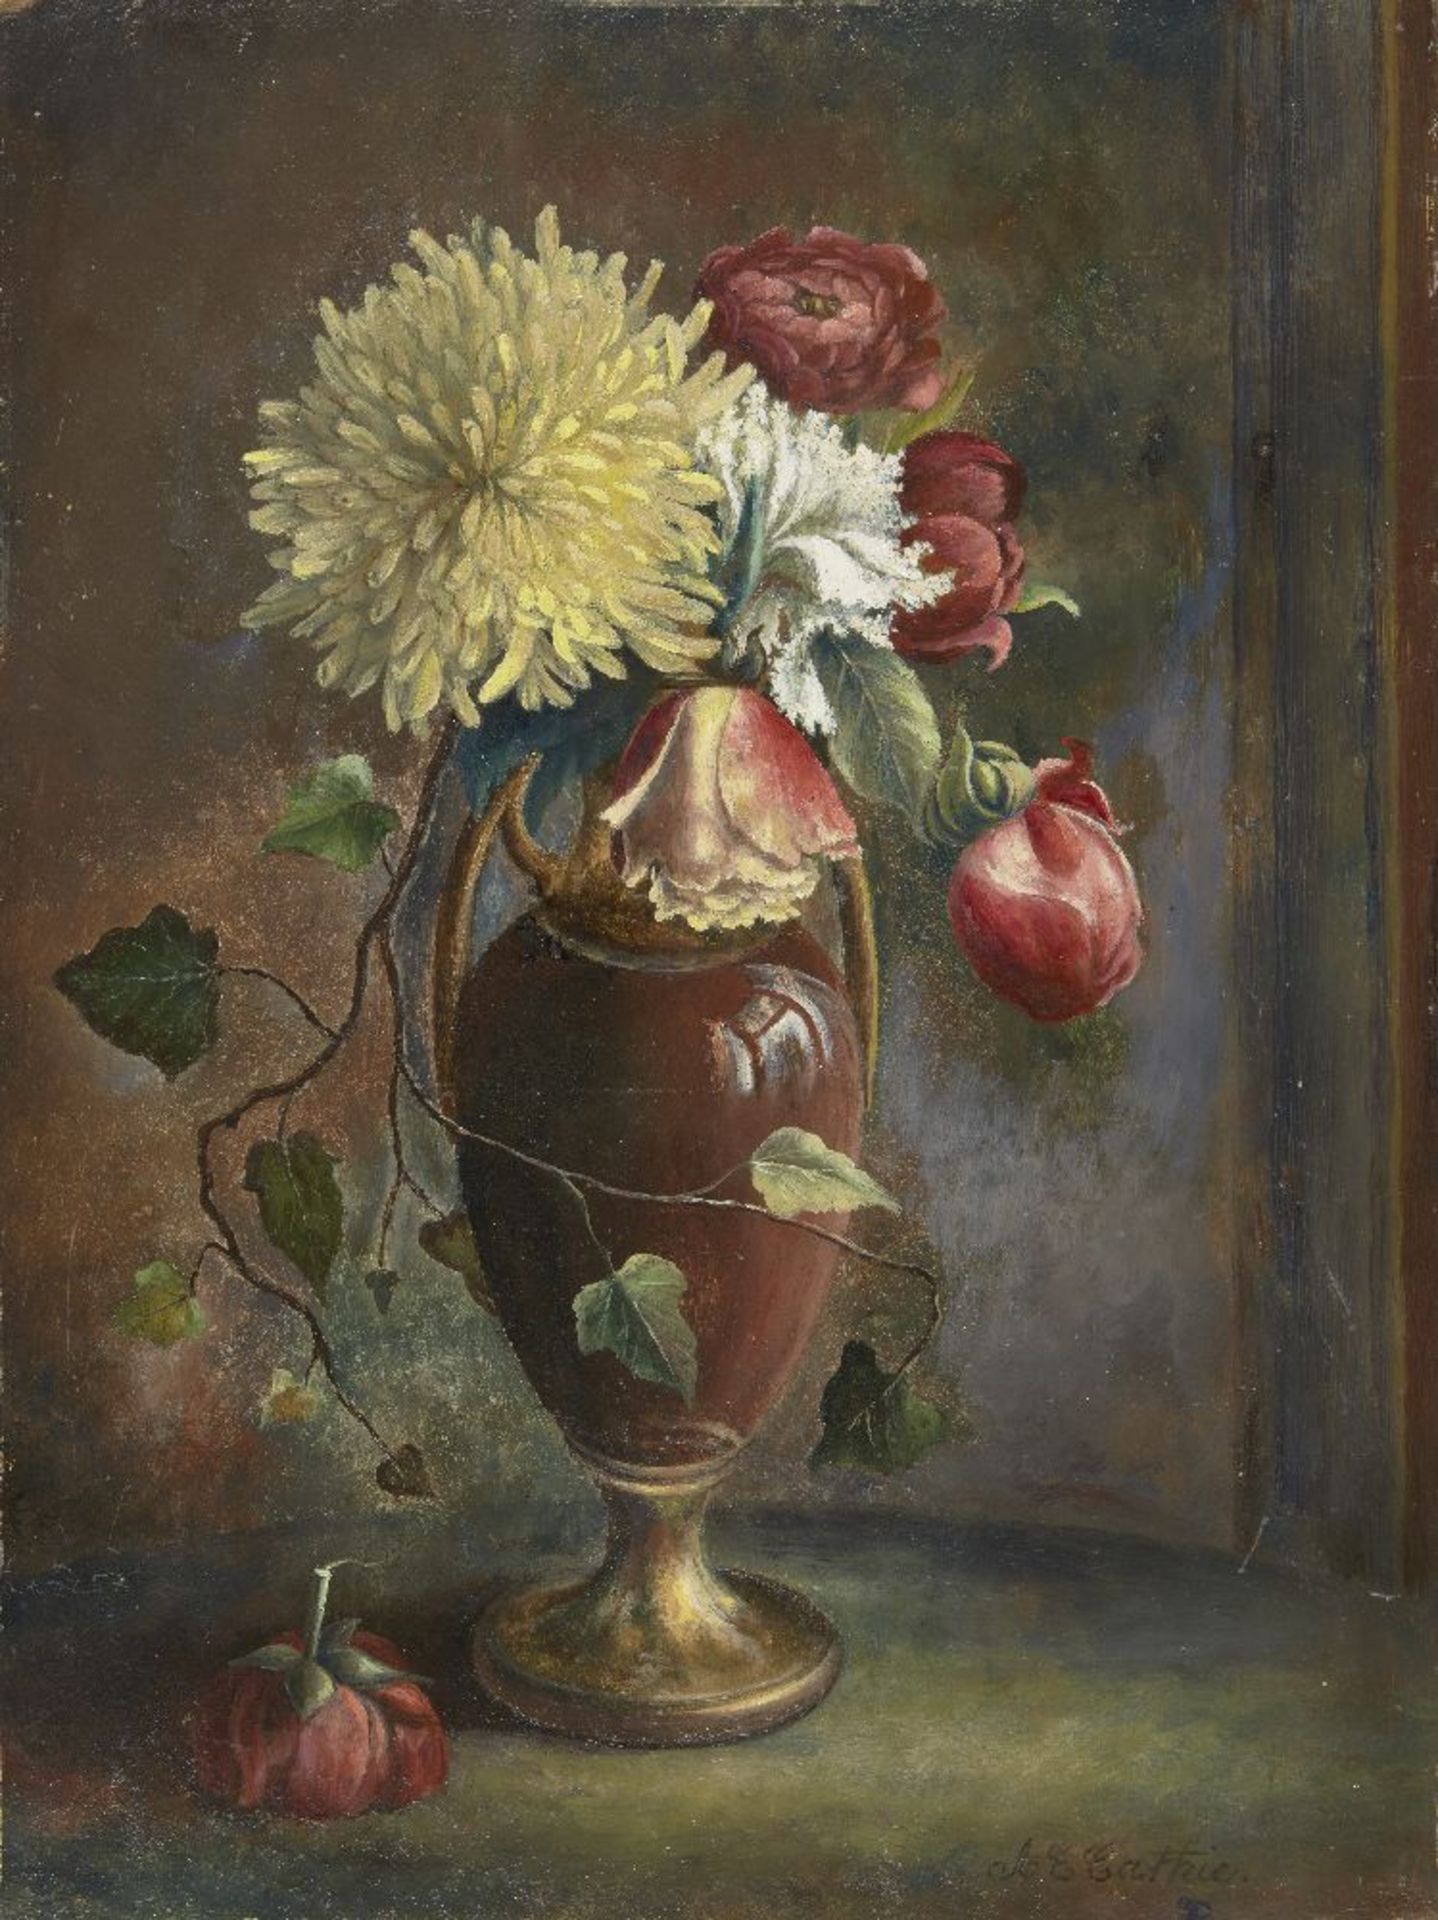 A E Cathie, British exh 1891- Flowers in a vase; oil on board, signed, 31x23.5cm (unframed) Please